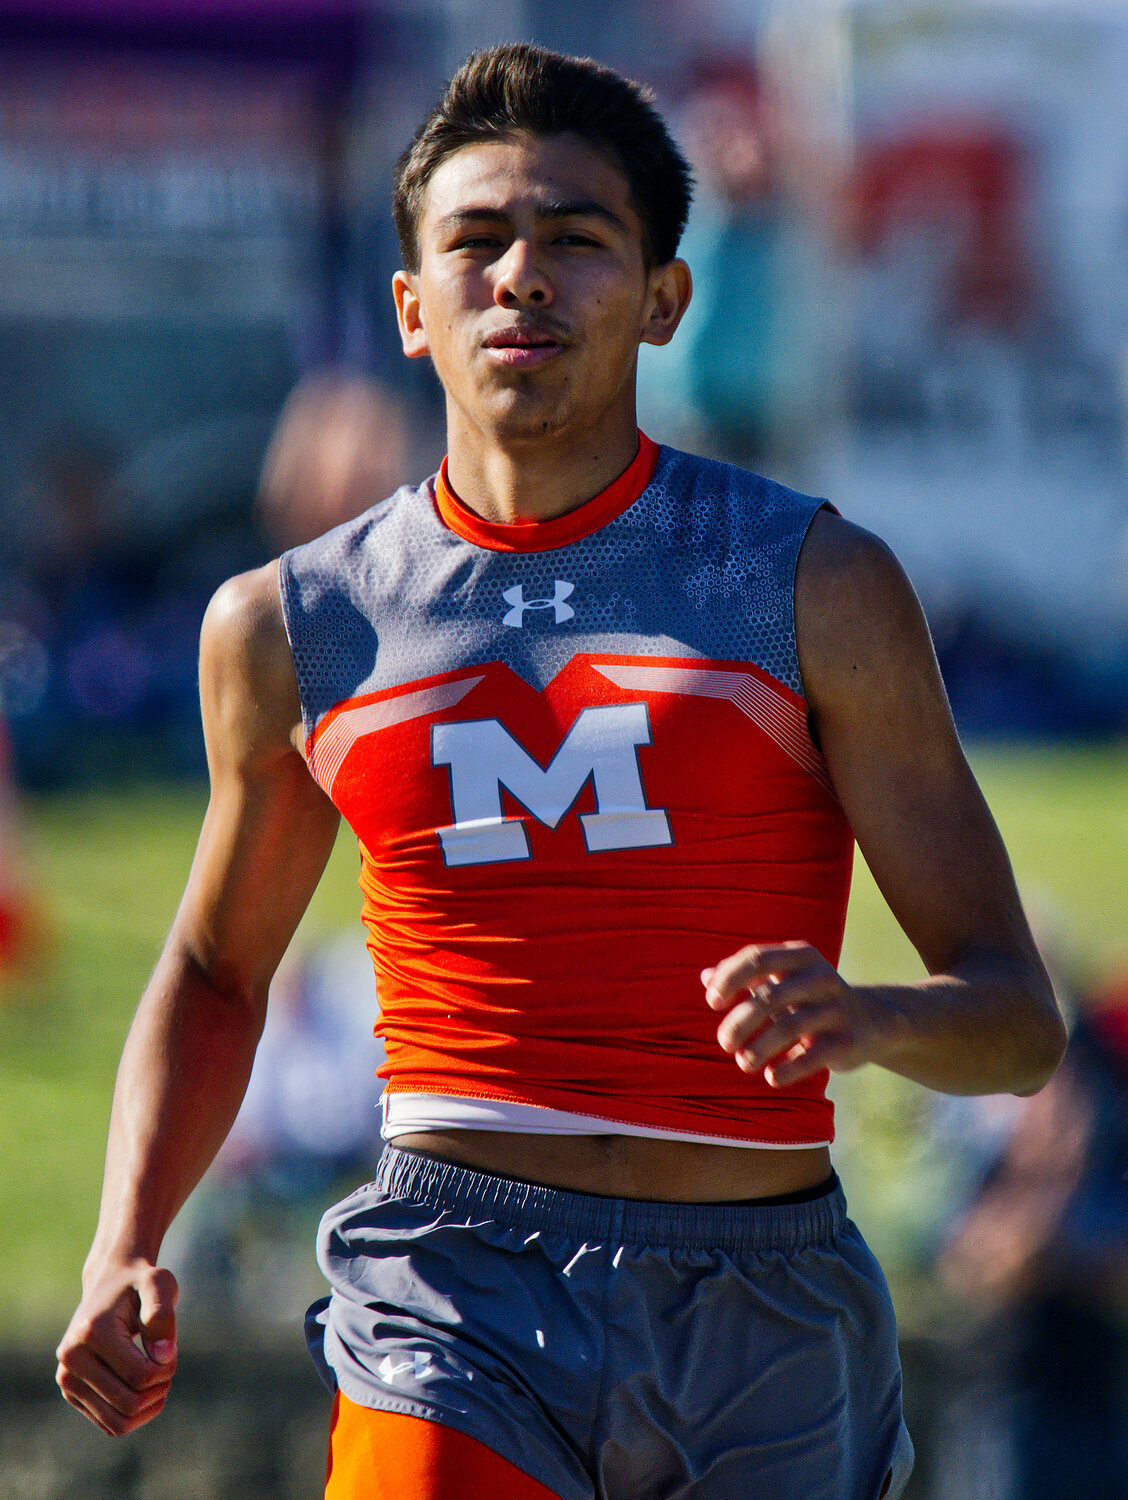 Jacob Lazano finishes the 400m run. [take in more track images]